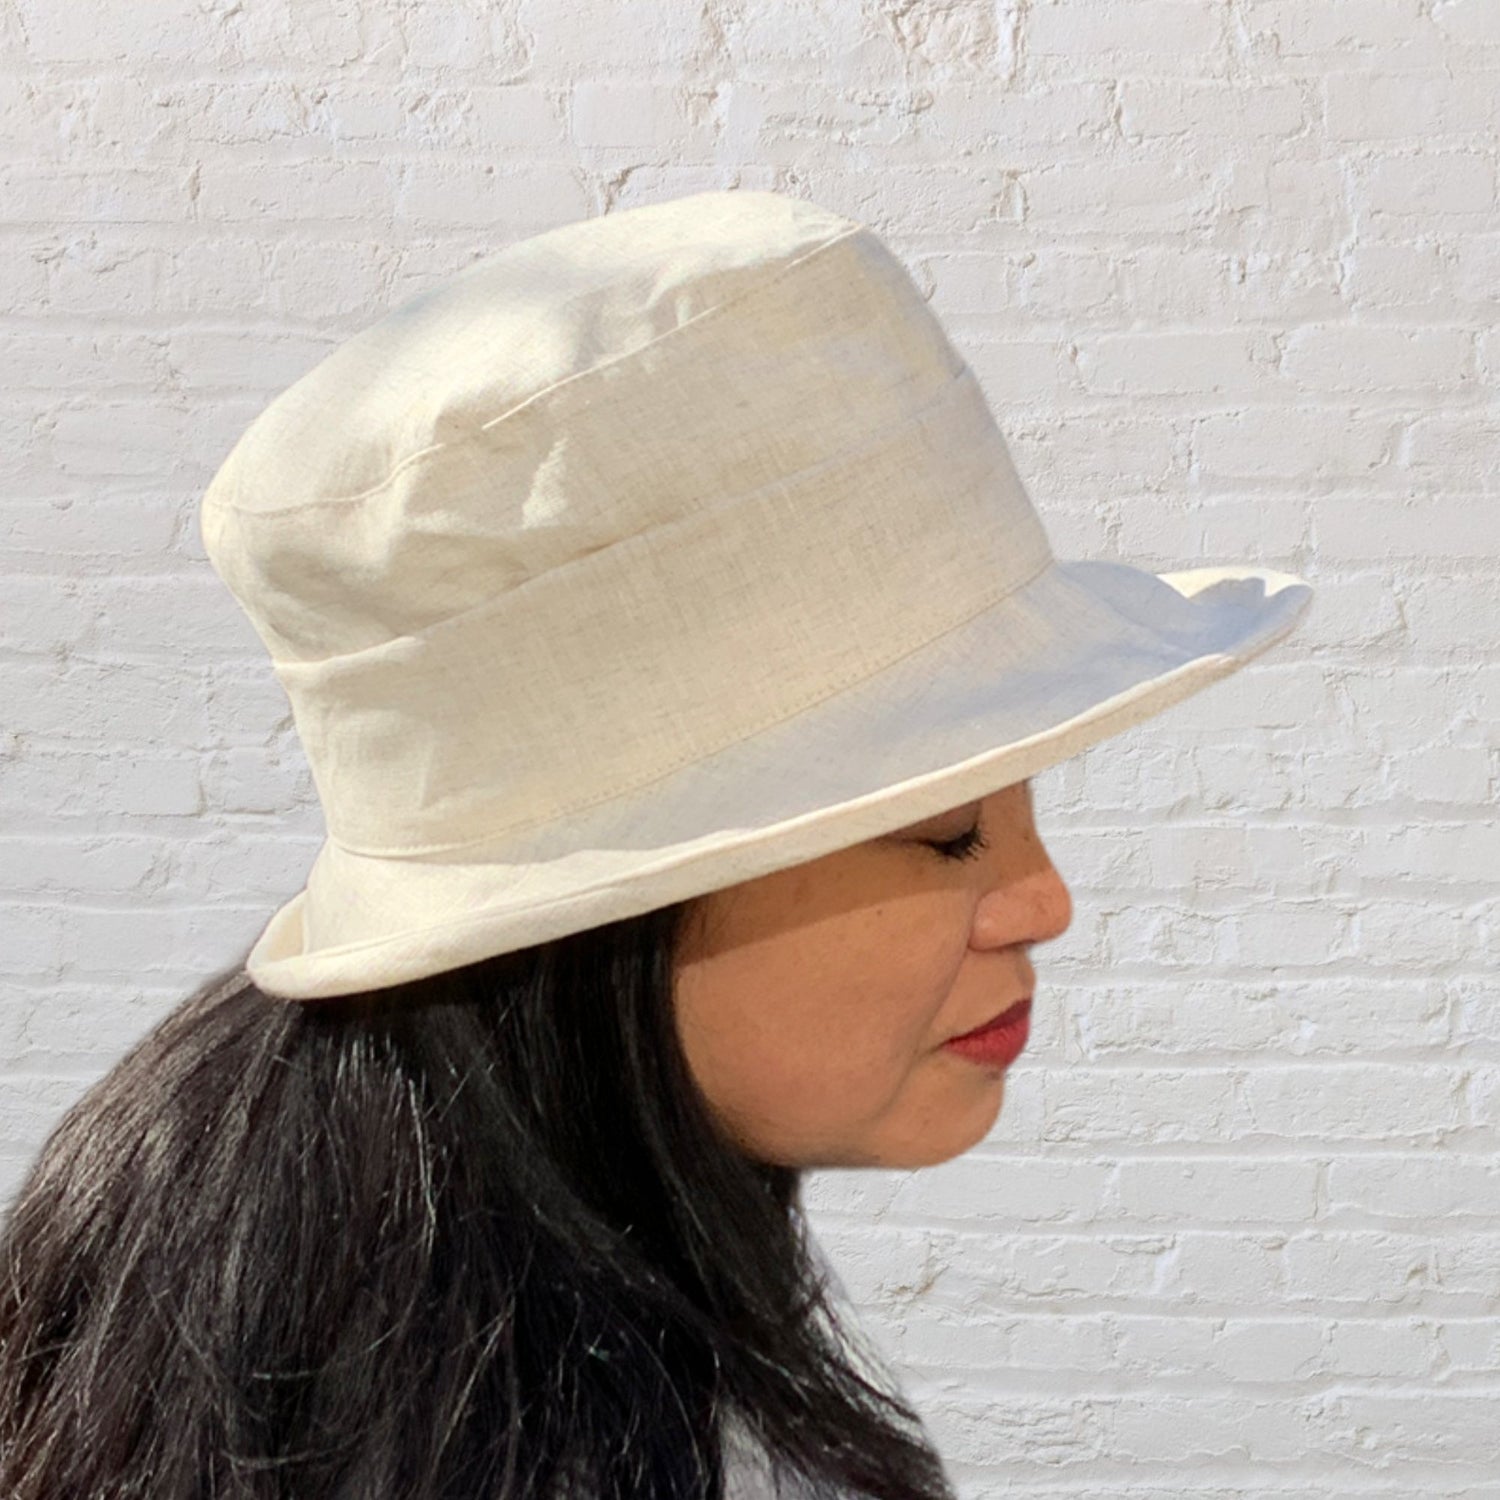 One-size-fits-all premium linen hat with UV50+ sun protection. Made in Quebec, Montreal, Canada by Geneviève Dostaler. Available in many colors. Perfect to complete your look with style and comfort.